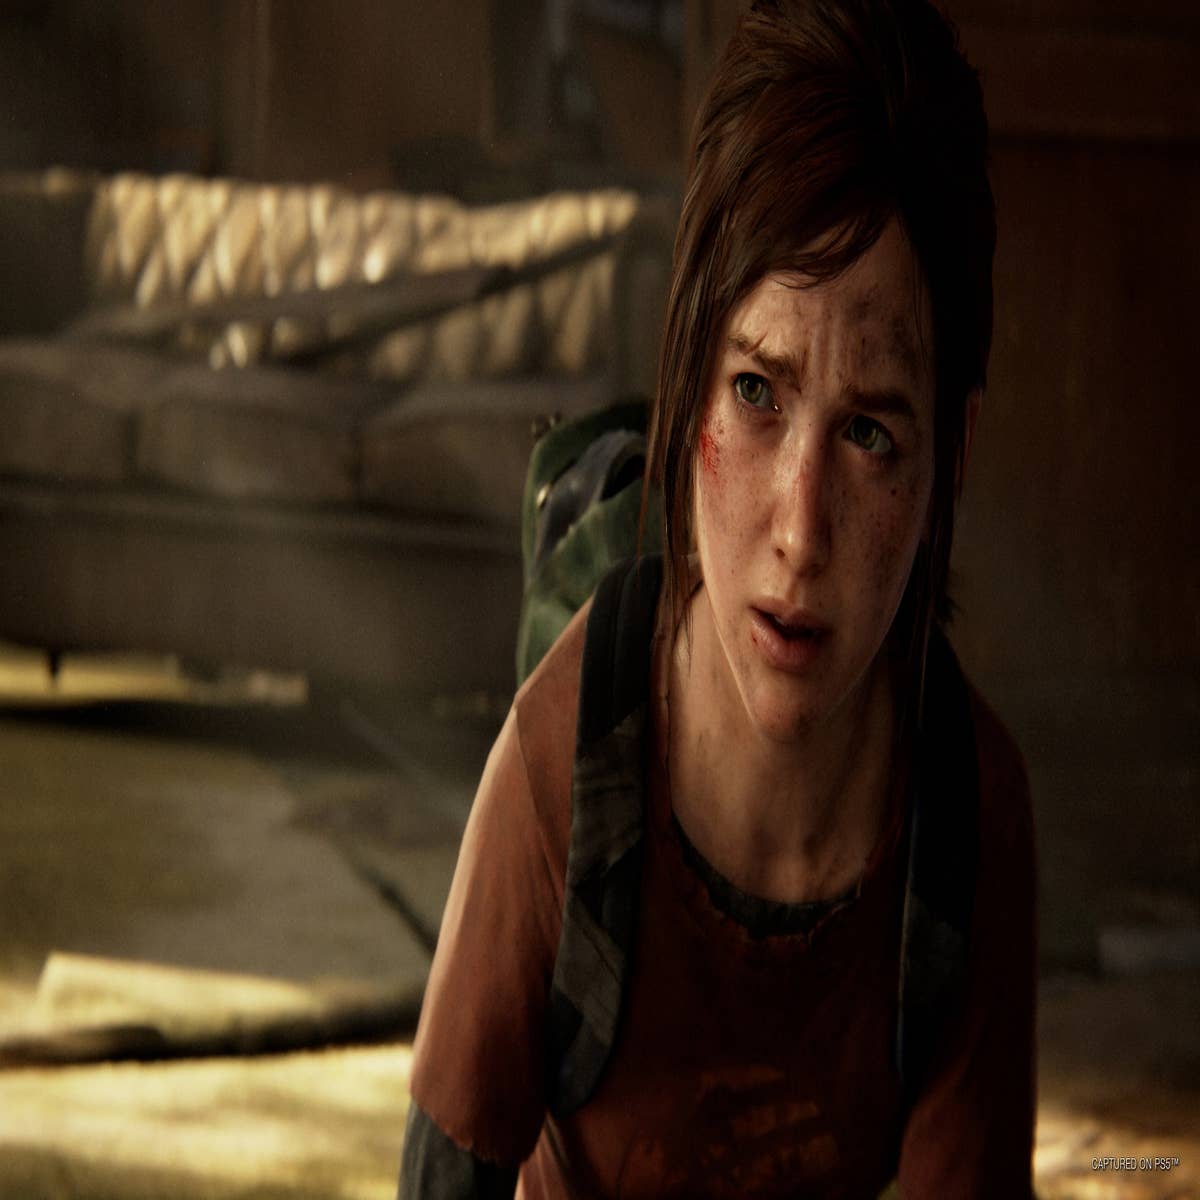 metacritic on X: The 7-year progression of The Last of Us The